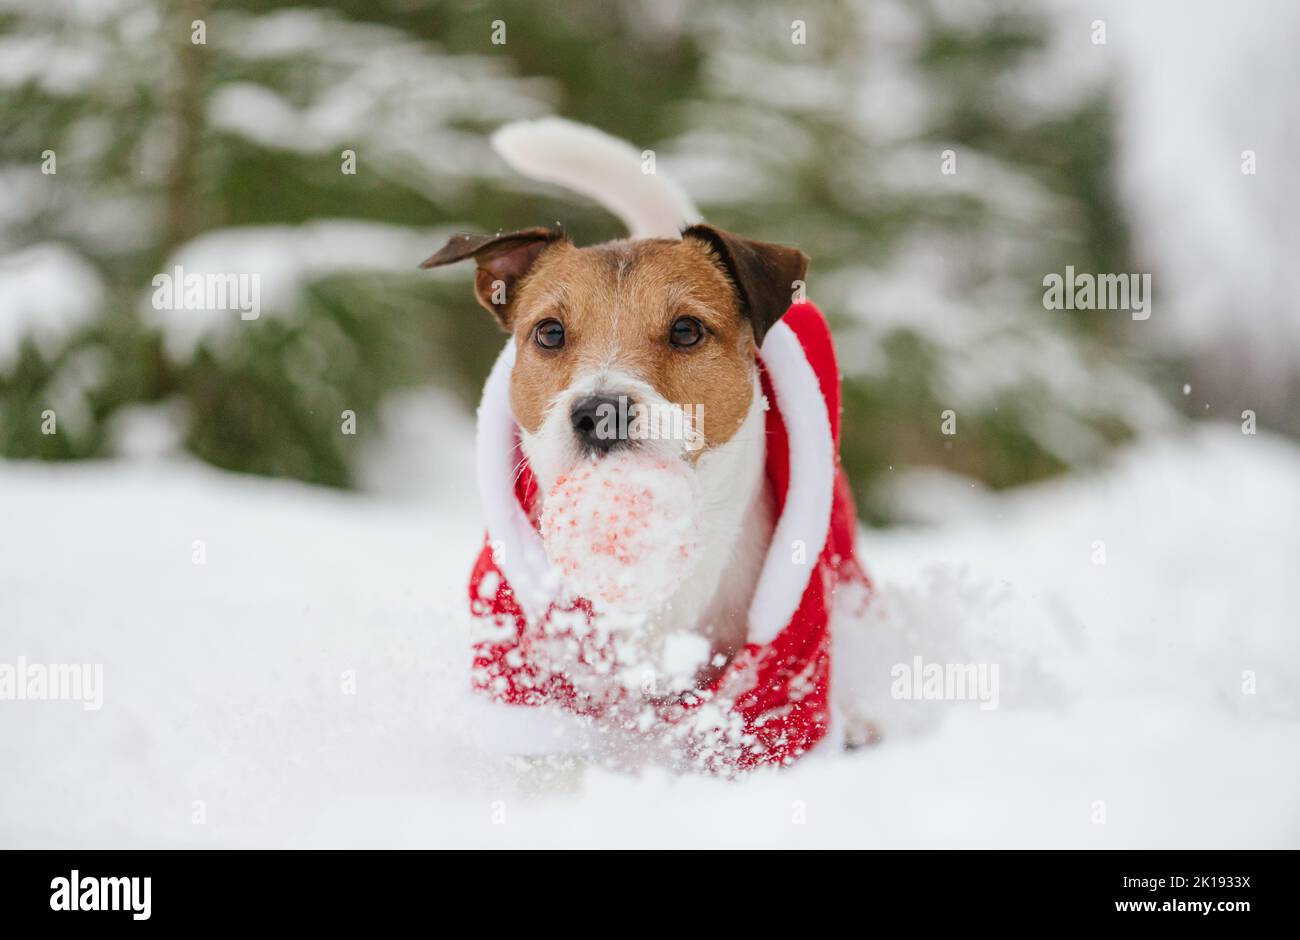 Dog wearing costume of Santa Claus playing in snow with ball Stock Photo